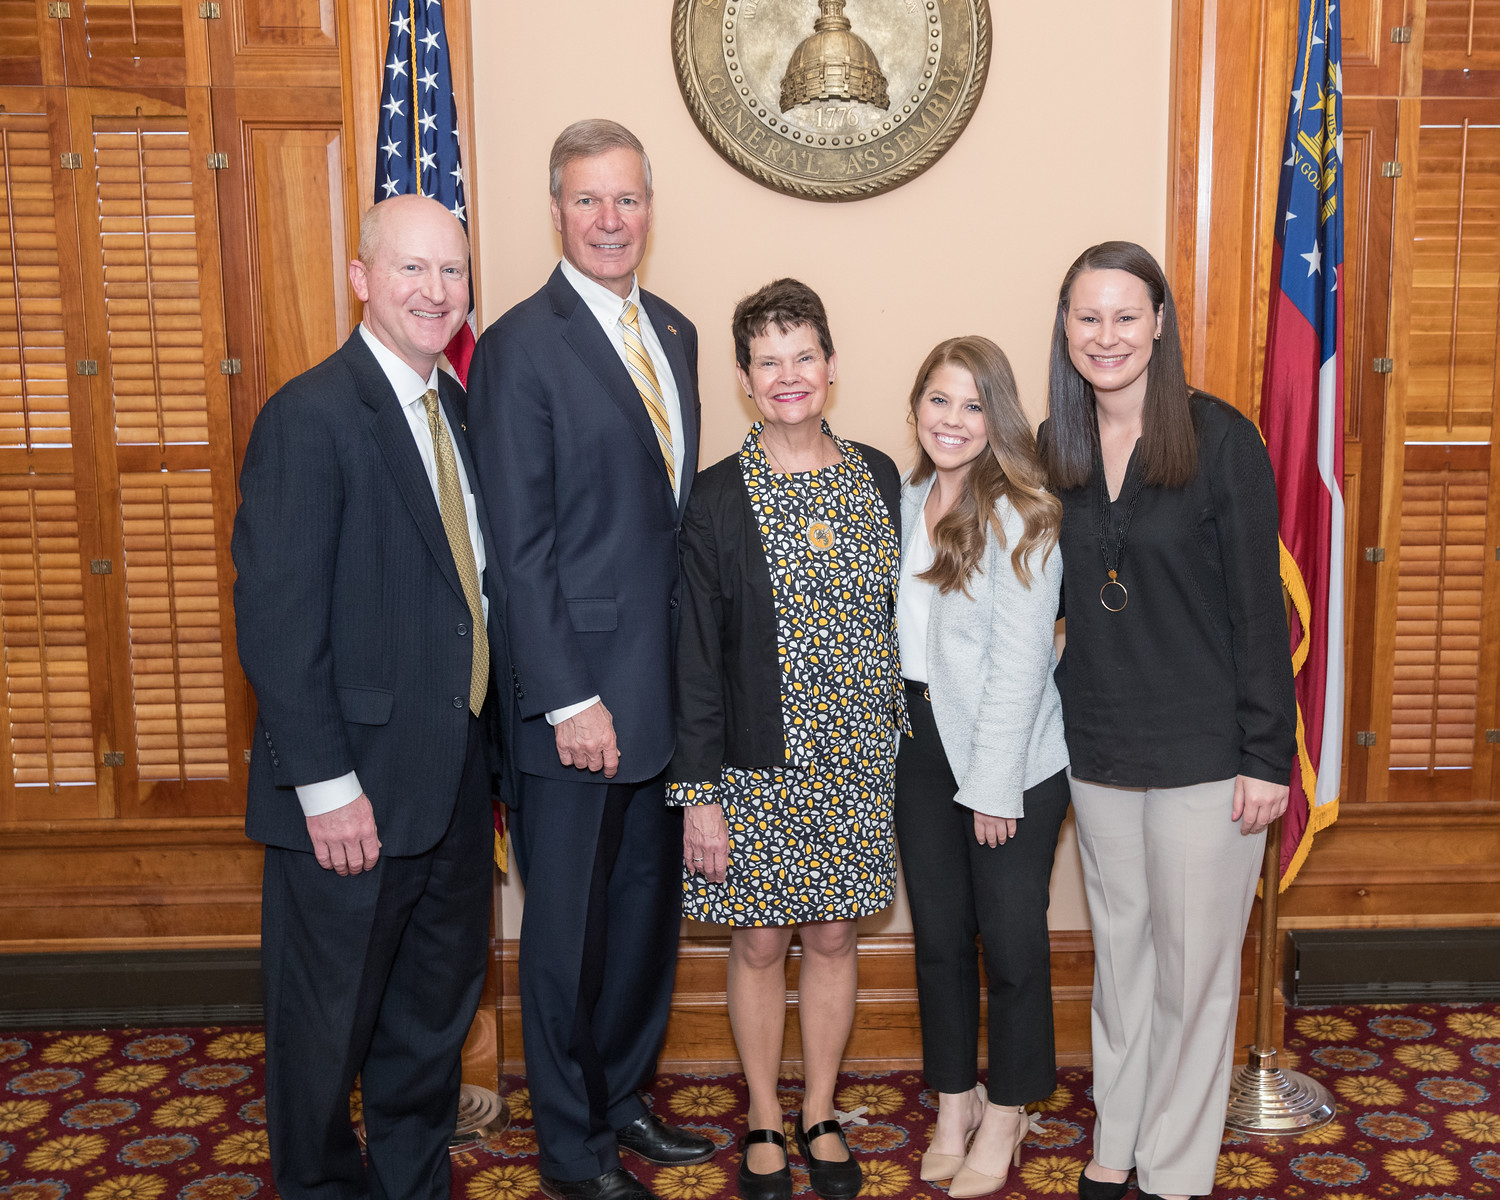 President G.P. "Bud" Peterson and wife Val Peterson were honored by the Georgia State Legislature on Monday, March 18. (L-R): Dene Sheheane; G.P. "Bud" Peterson; Val Peterson; Morgan McCombs; Olivia Watkins